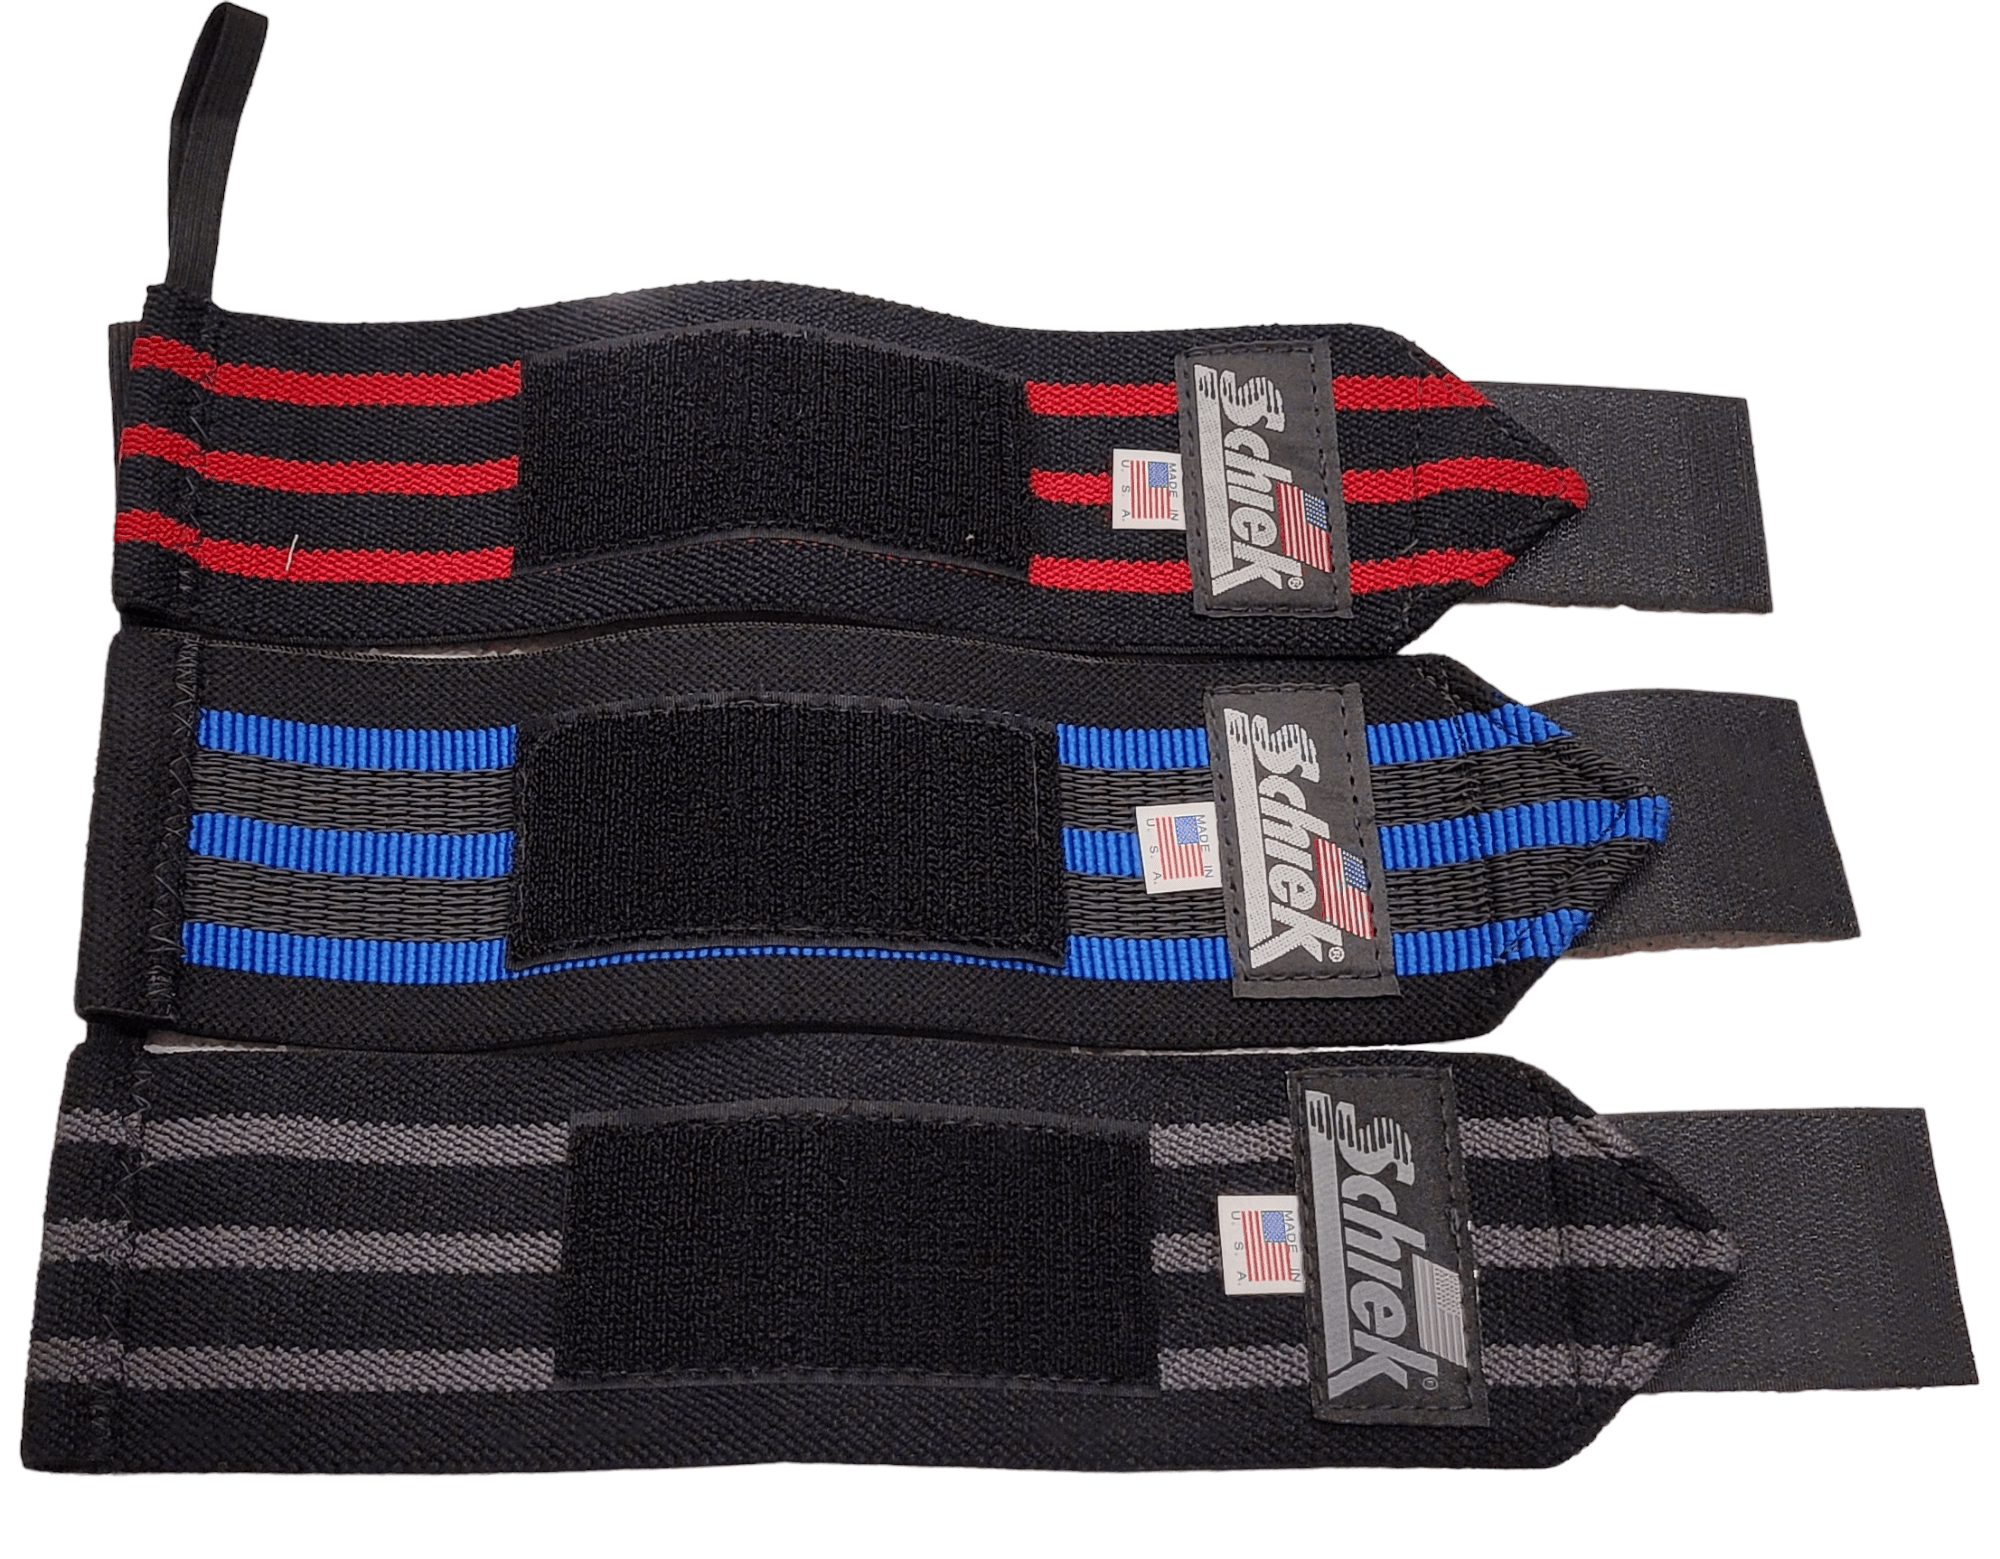 Weight Lifting Belts - Straps, Wraps & Support